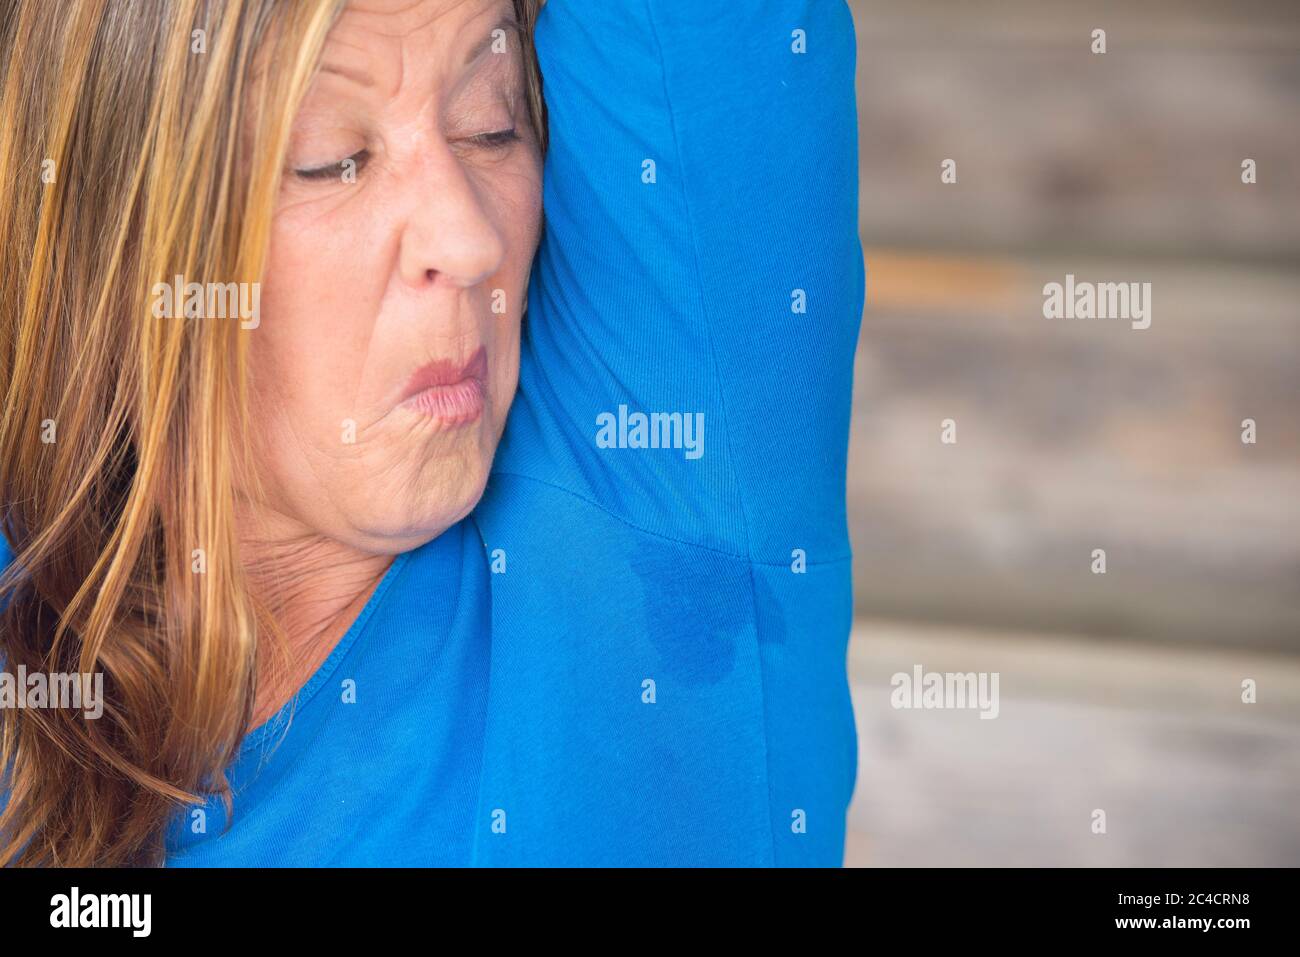 Portrait mature woman with sweat perspiration under arm with smelly wet moisture spot on blue shirt, blurred background, copy space. Stock Photo